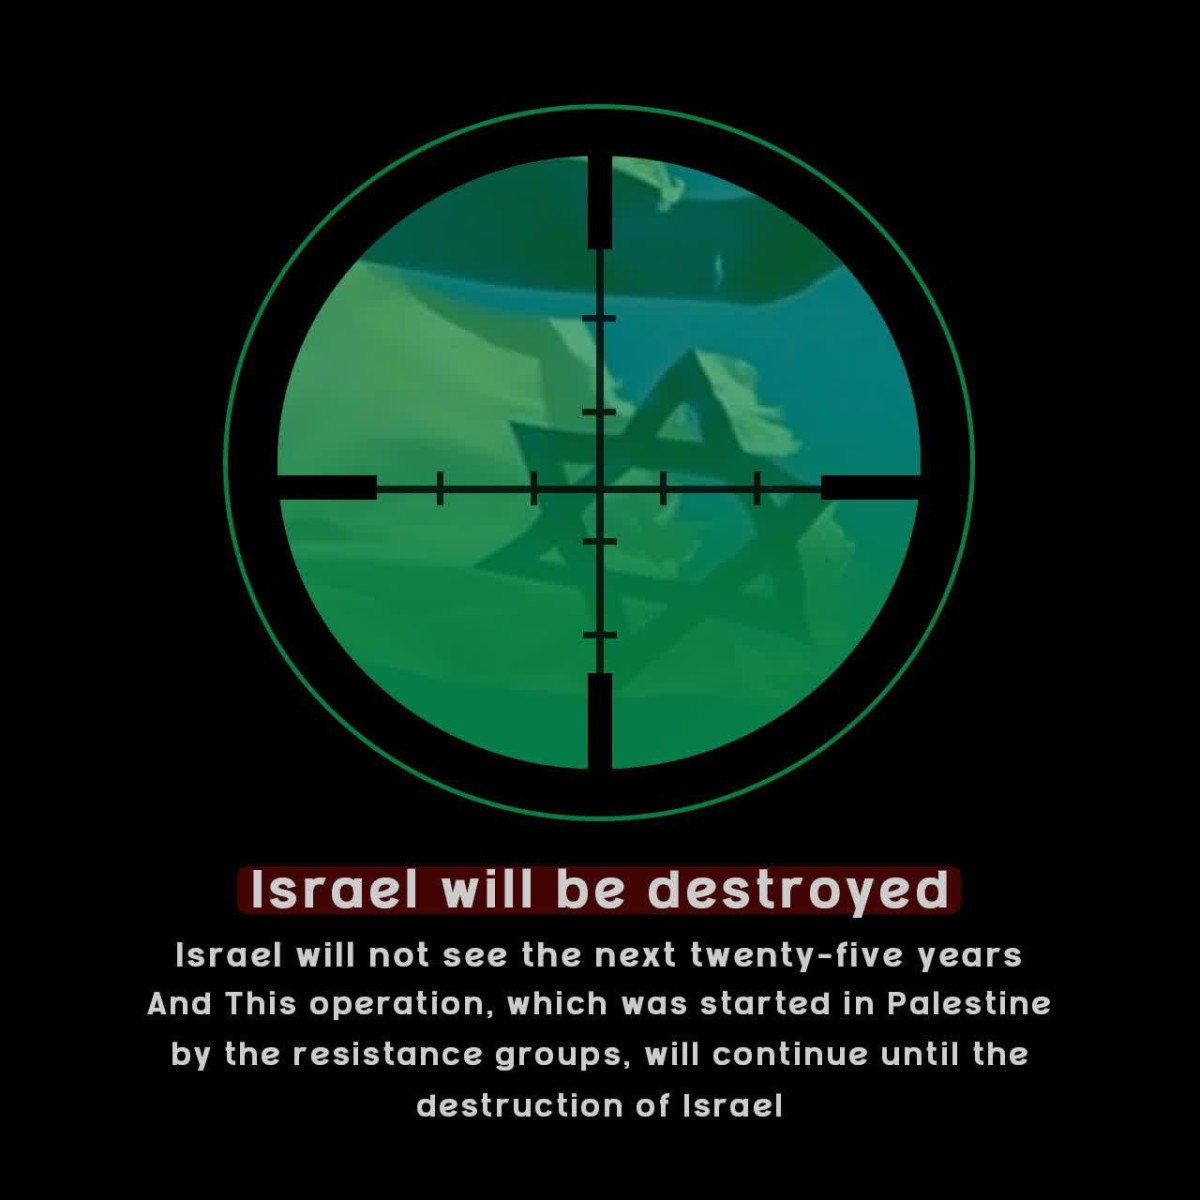 Israel will be destroyed